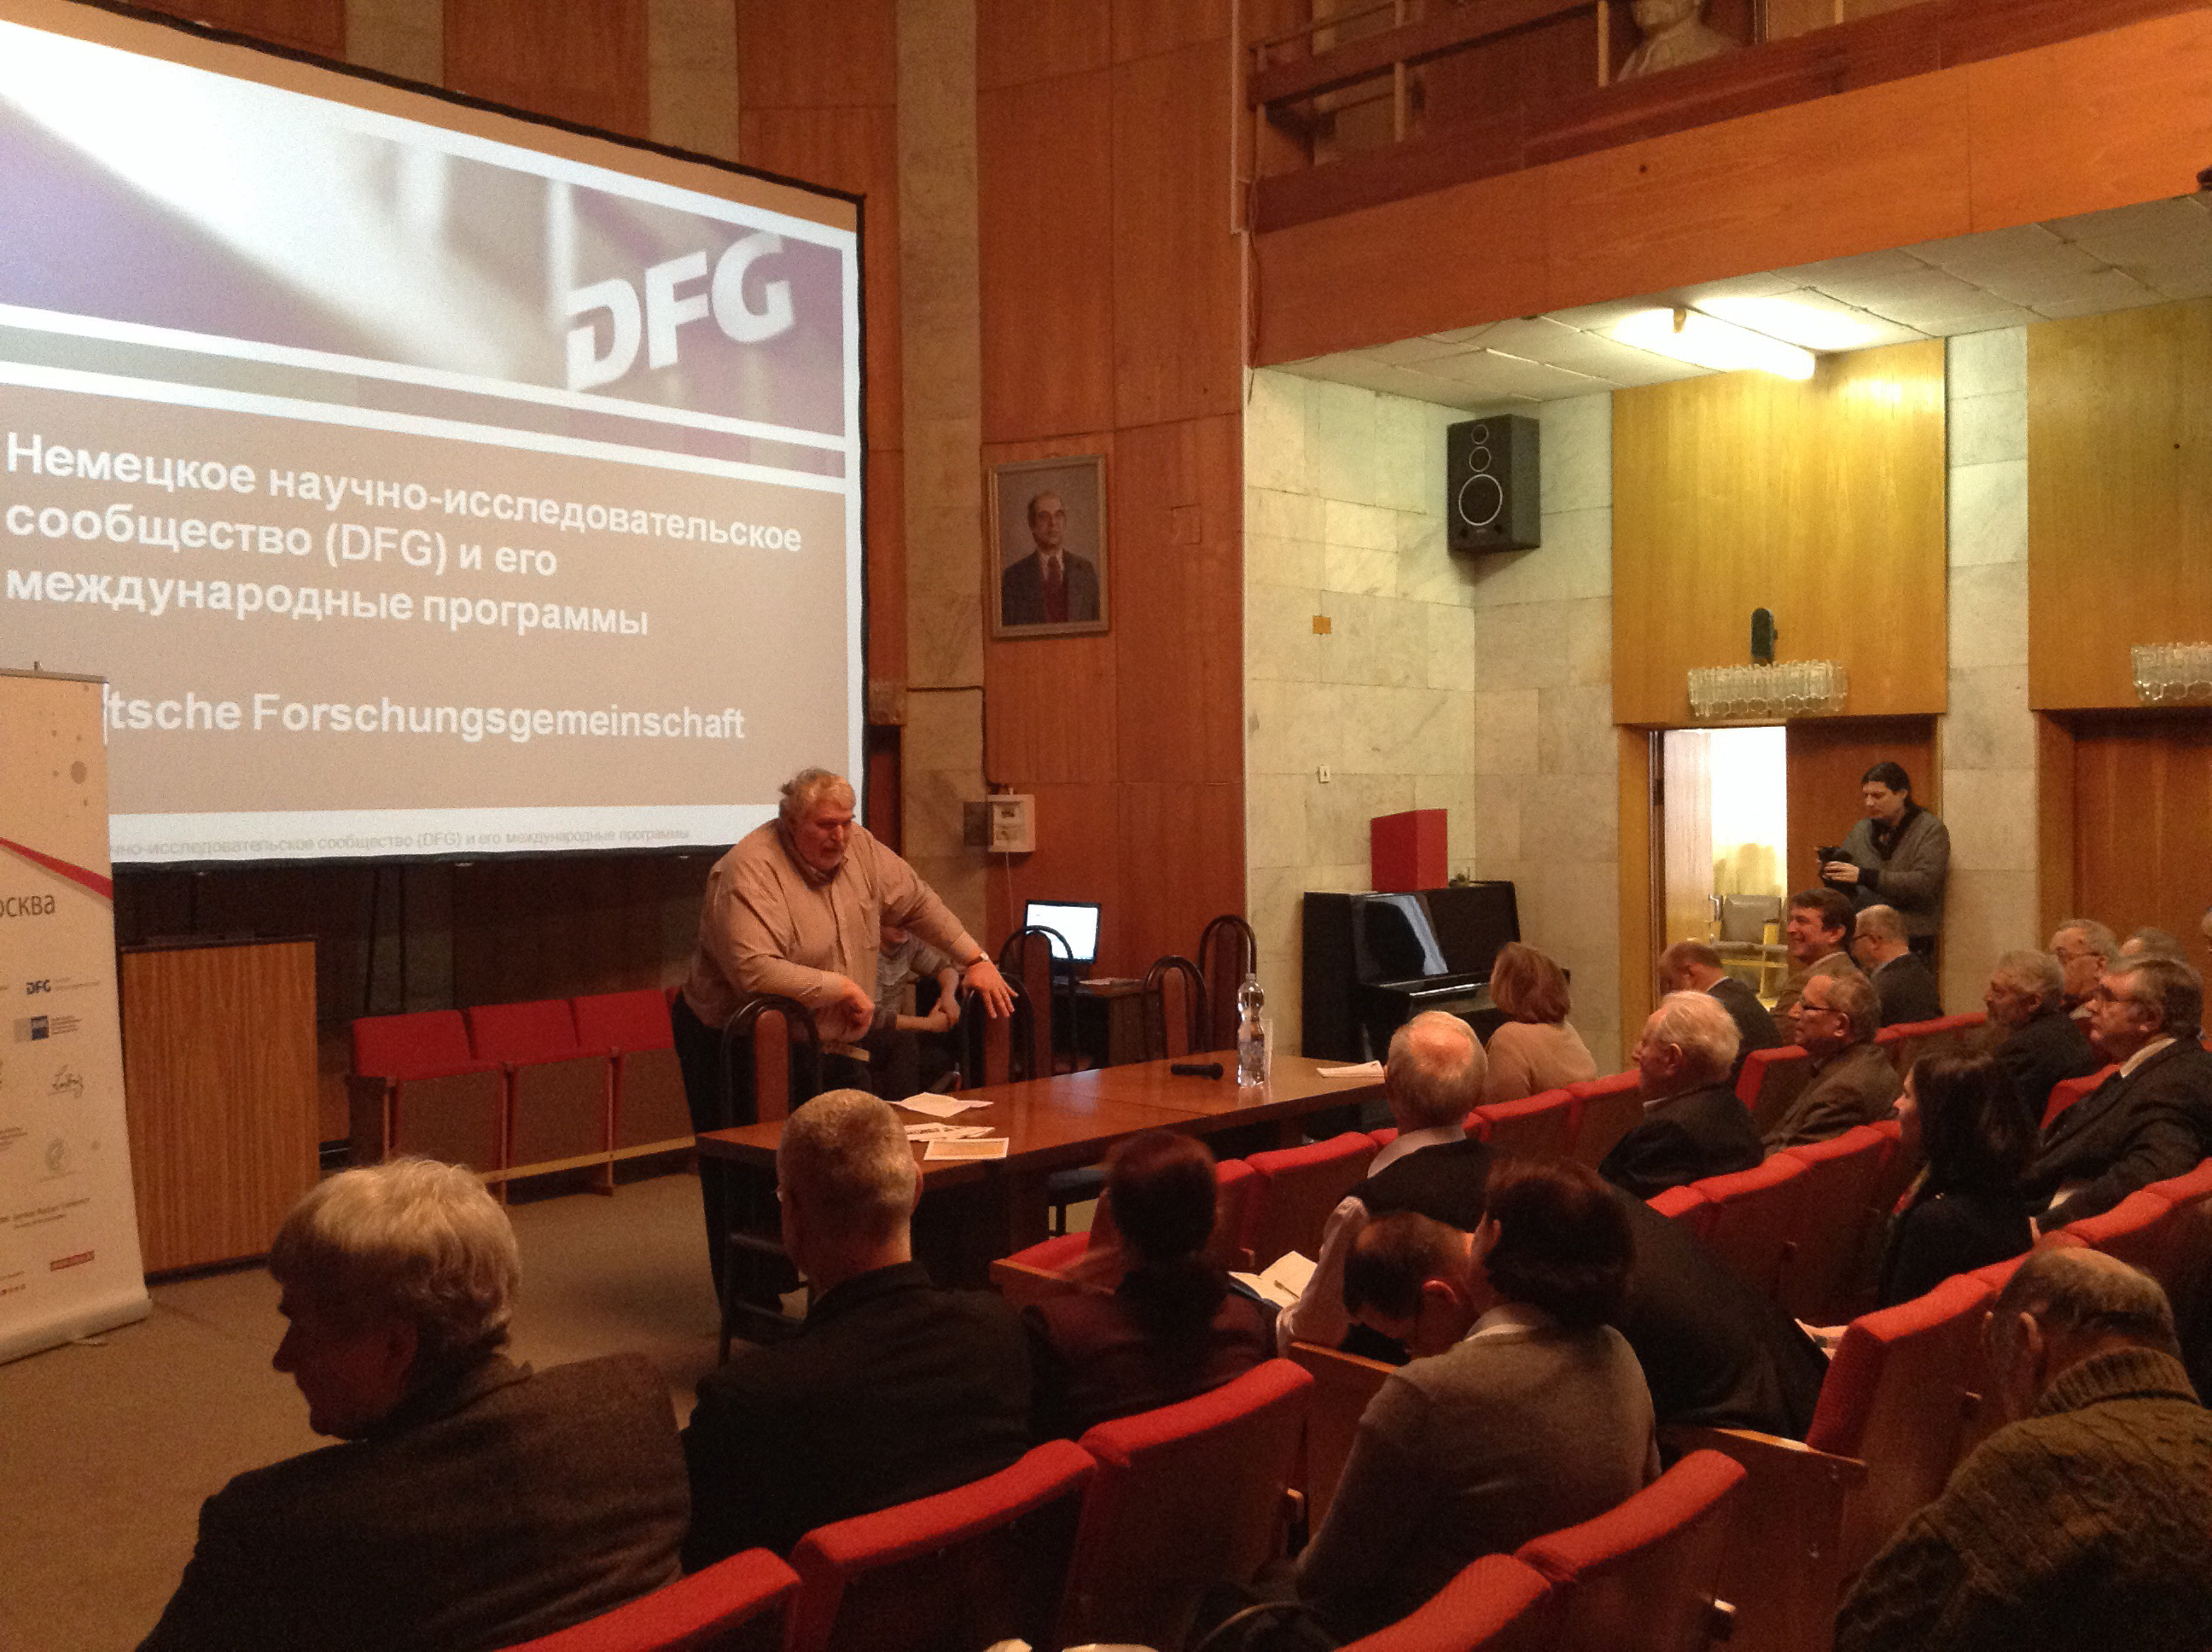 Director Victor Zadkov opens the information event at the Institute of Spectroscopy in Troitsk